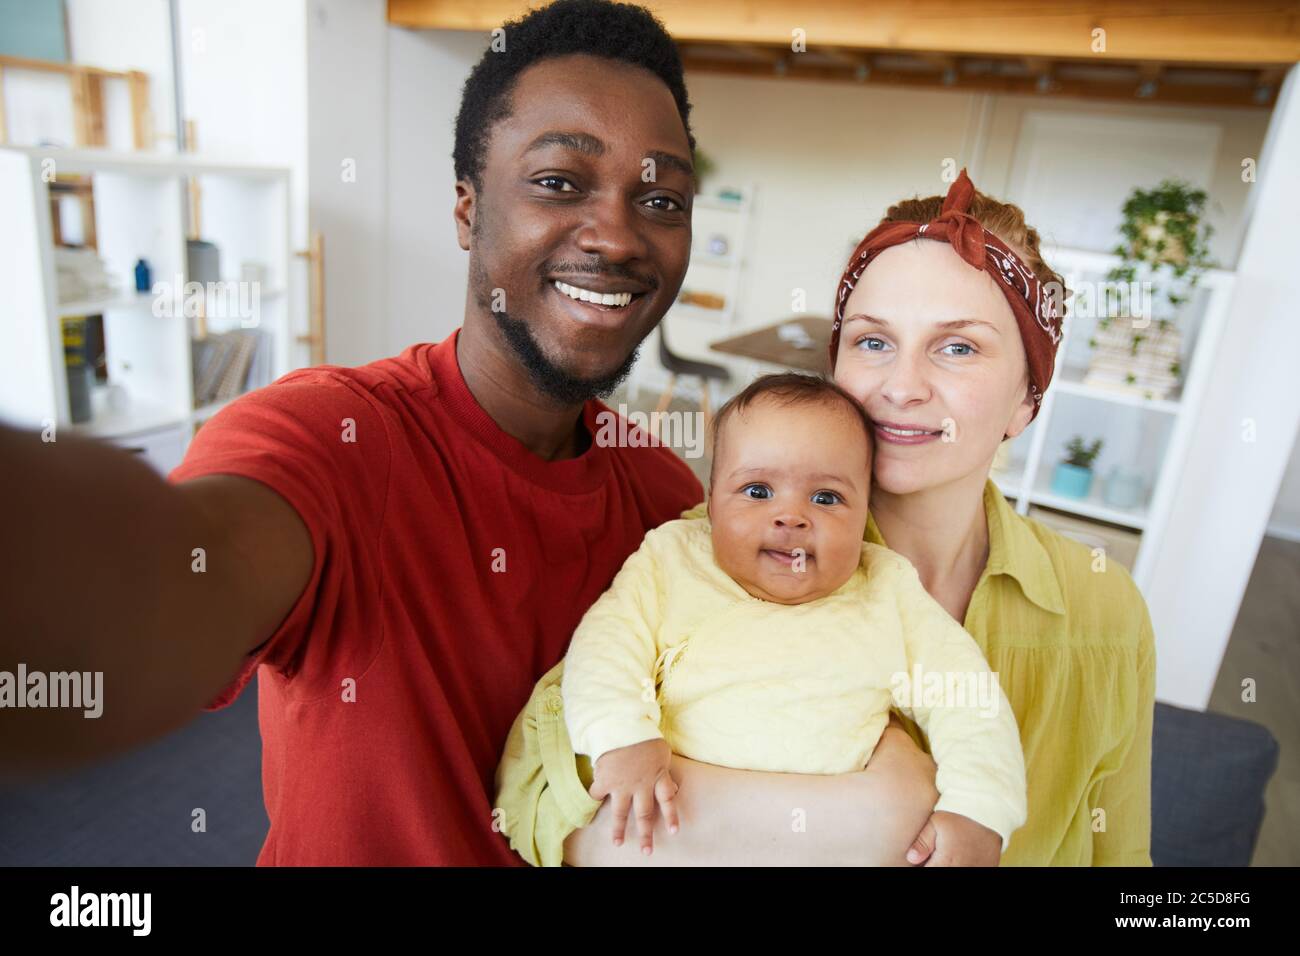 Portrait of happy family with baby girl smiling at camera they making selfie portrait Stock Photo